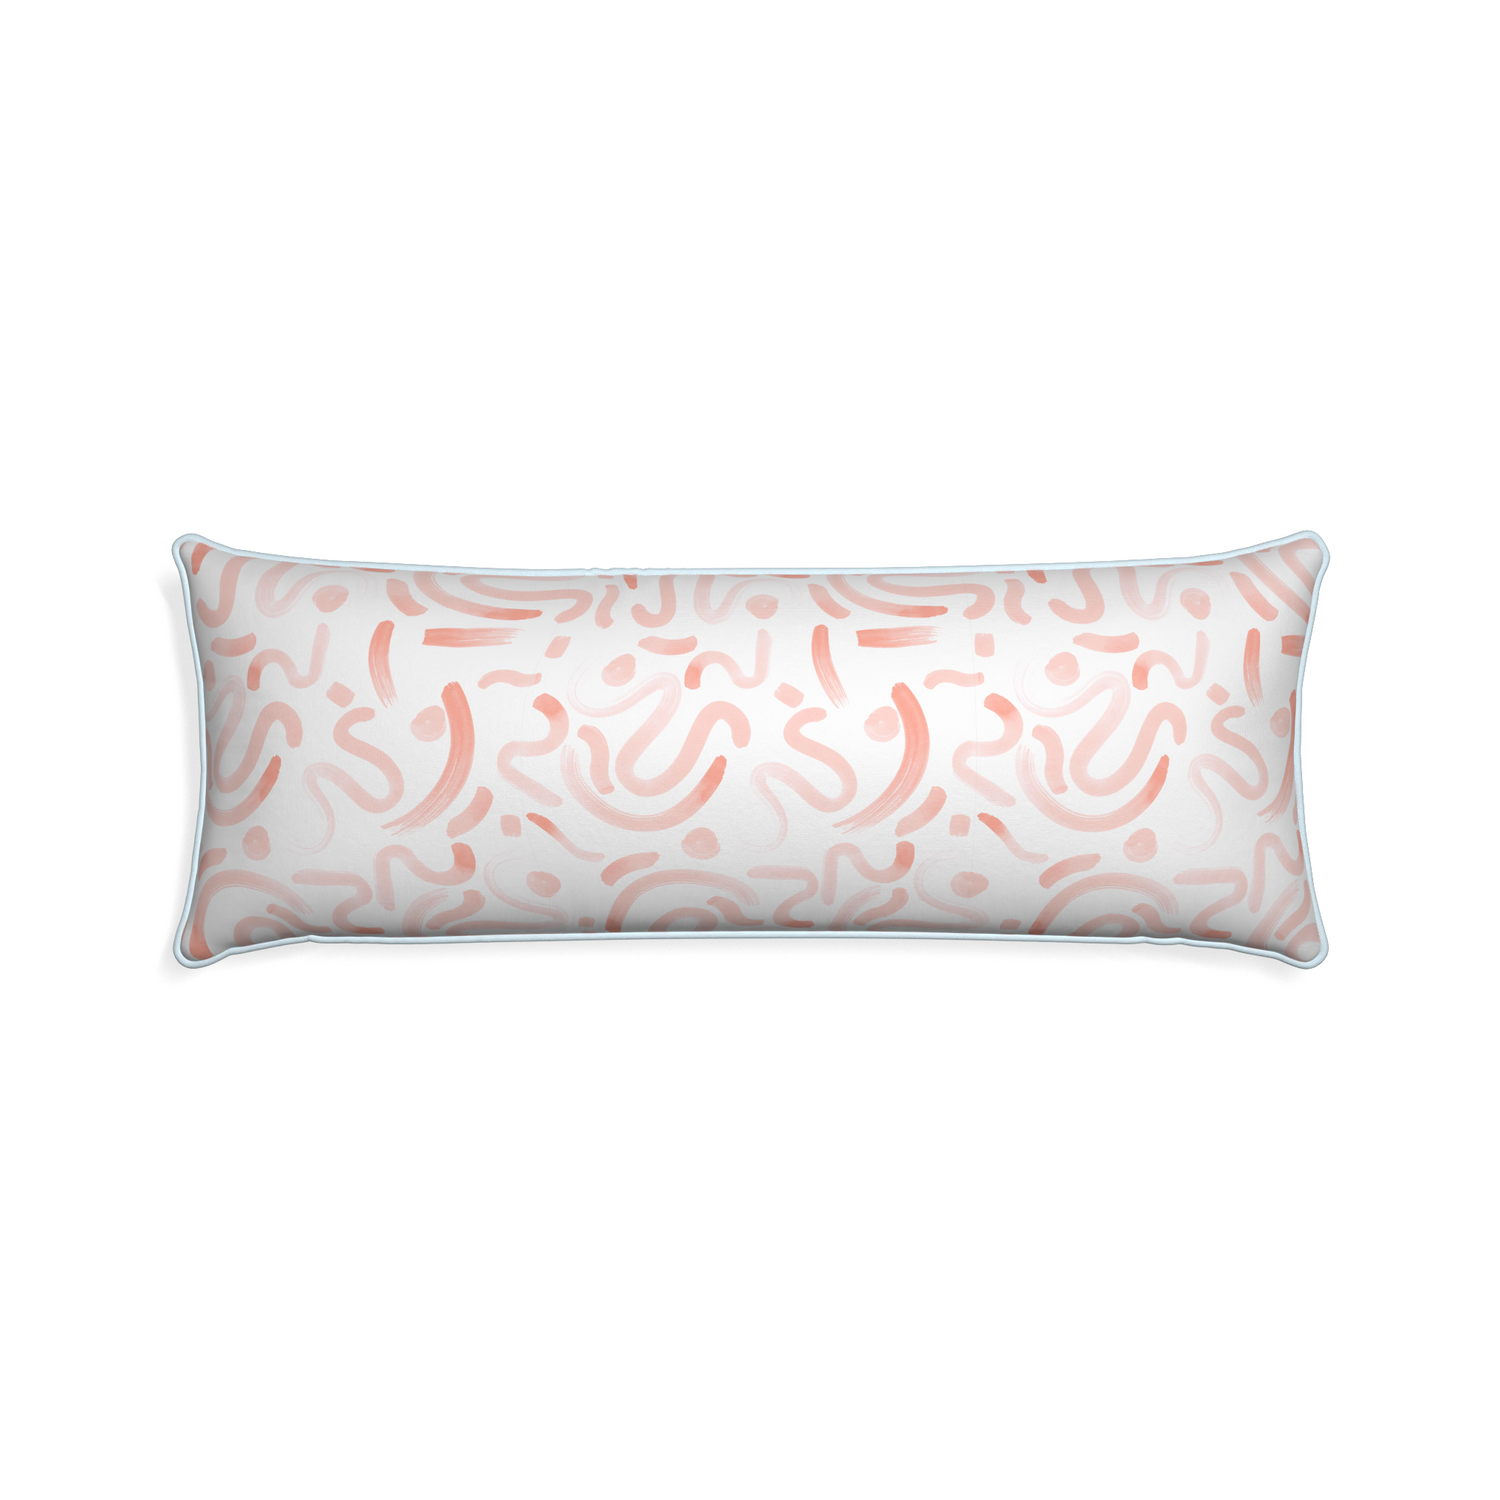 Xl-lumbar hockney pink custom pink graphicpillow with powder piping on white background